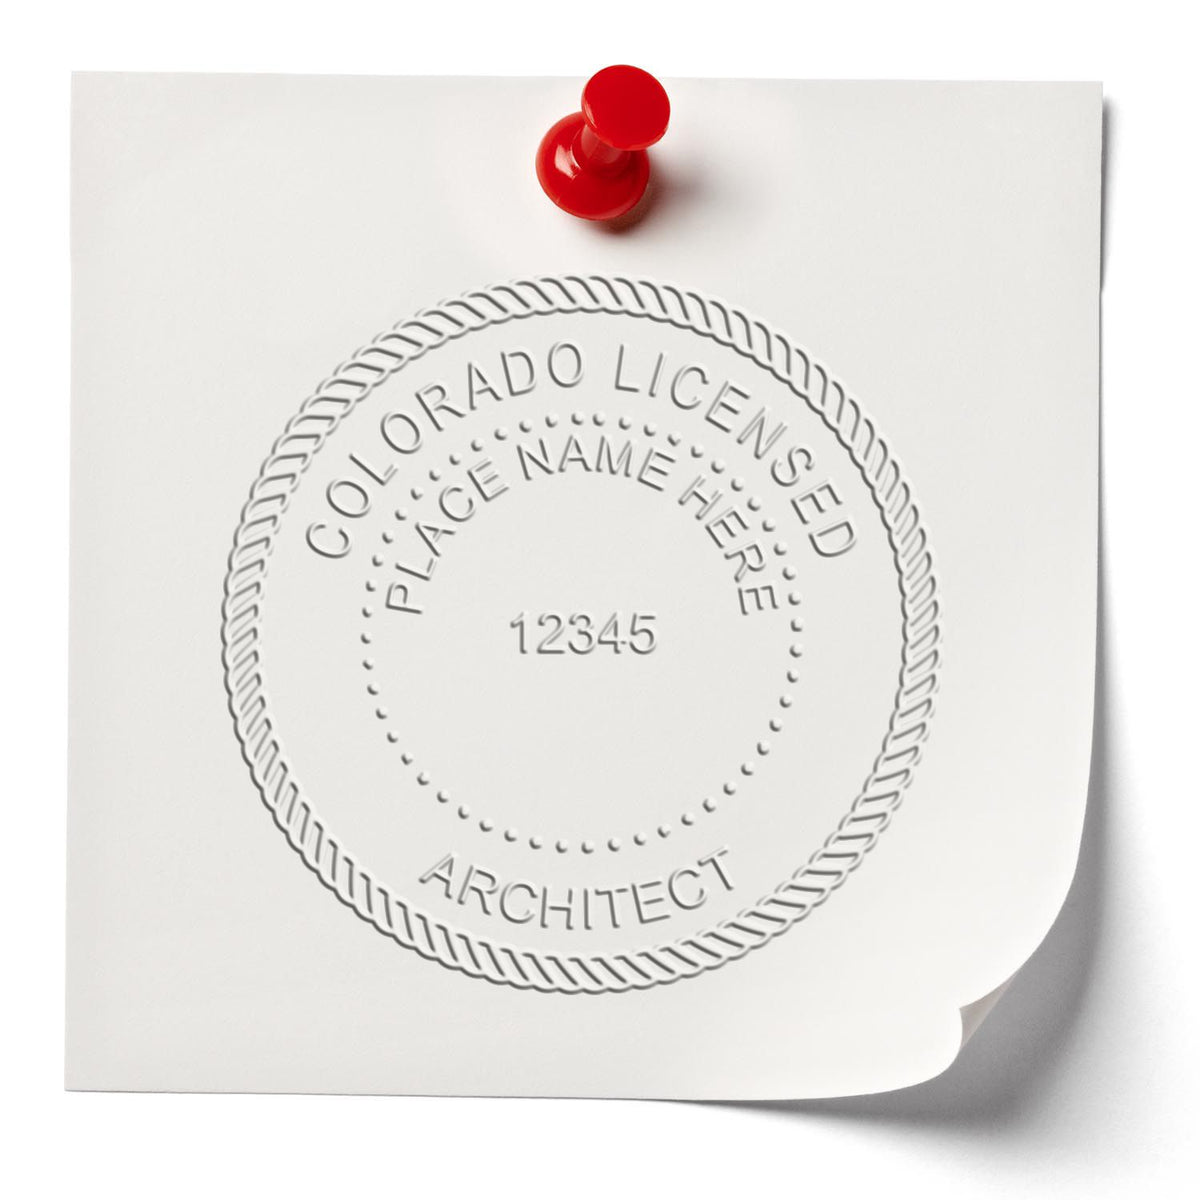 The Gift Colorado Architect Seal stamp impression comes to life with a crisp, detailed image stamped on paper - showcasing true professional quality.